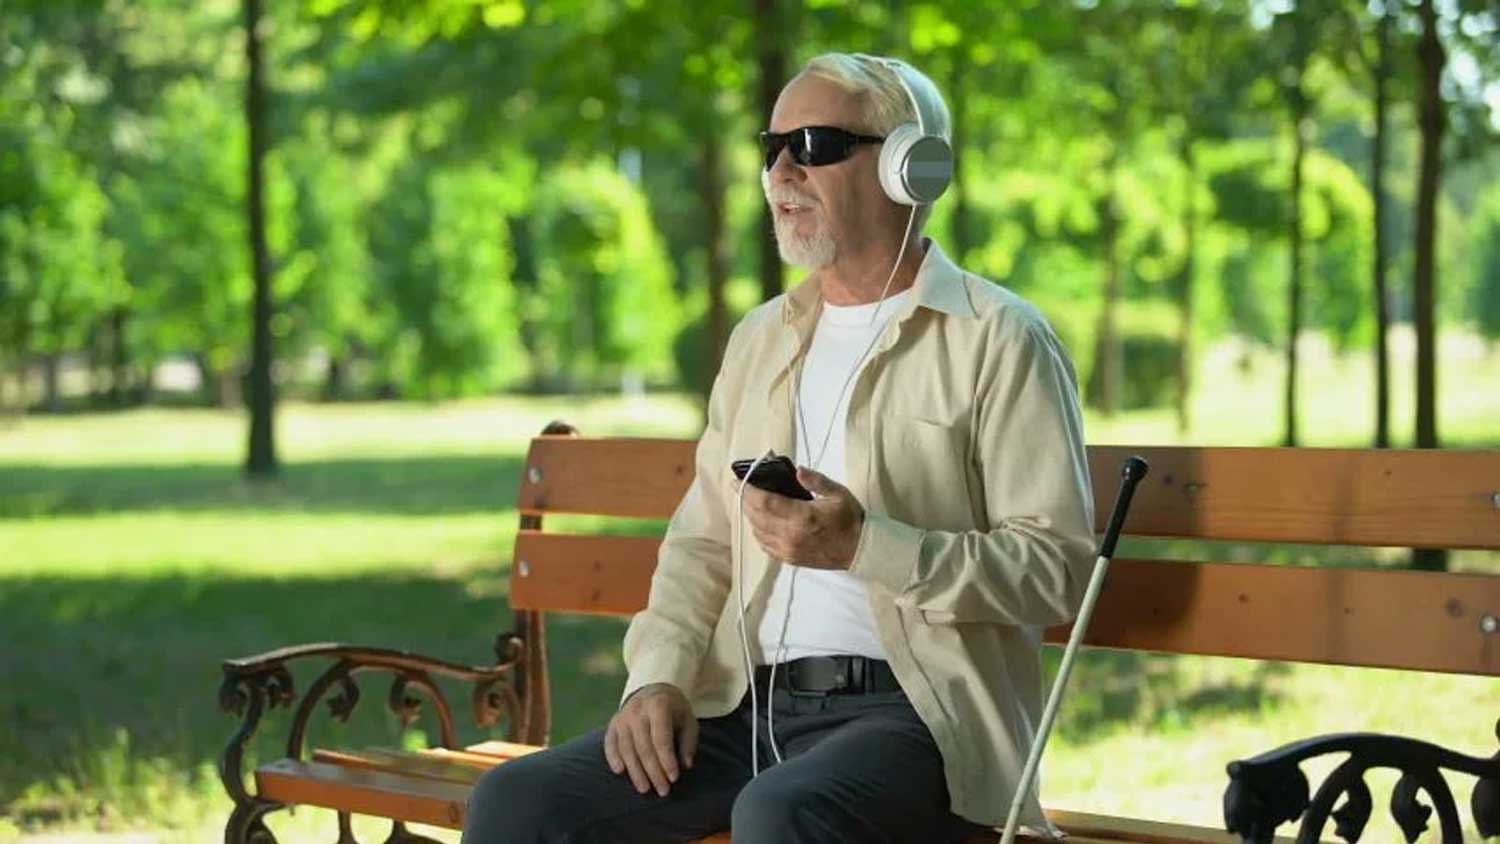 A blind man listening to an audio book on his mobile phone in sitting in a park.